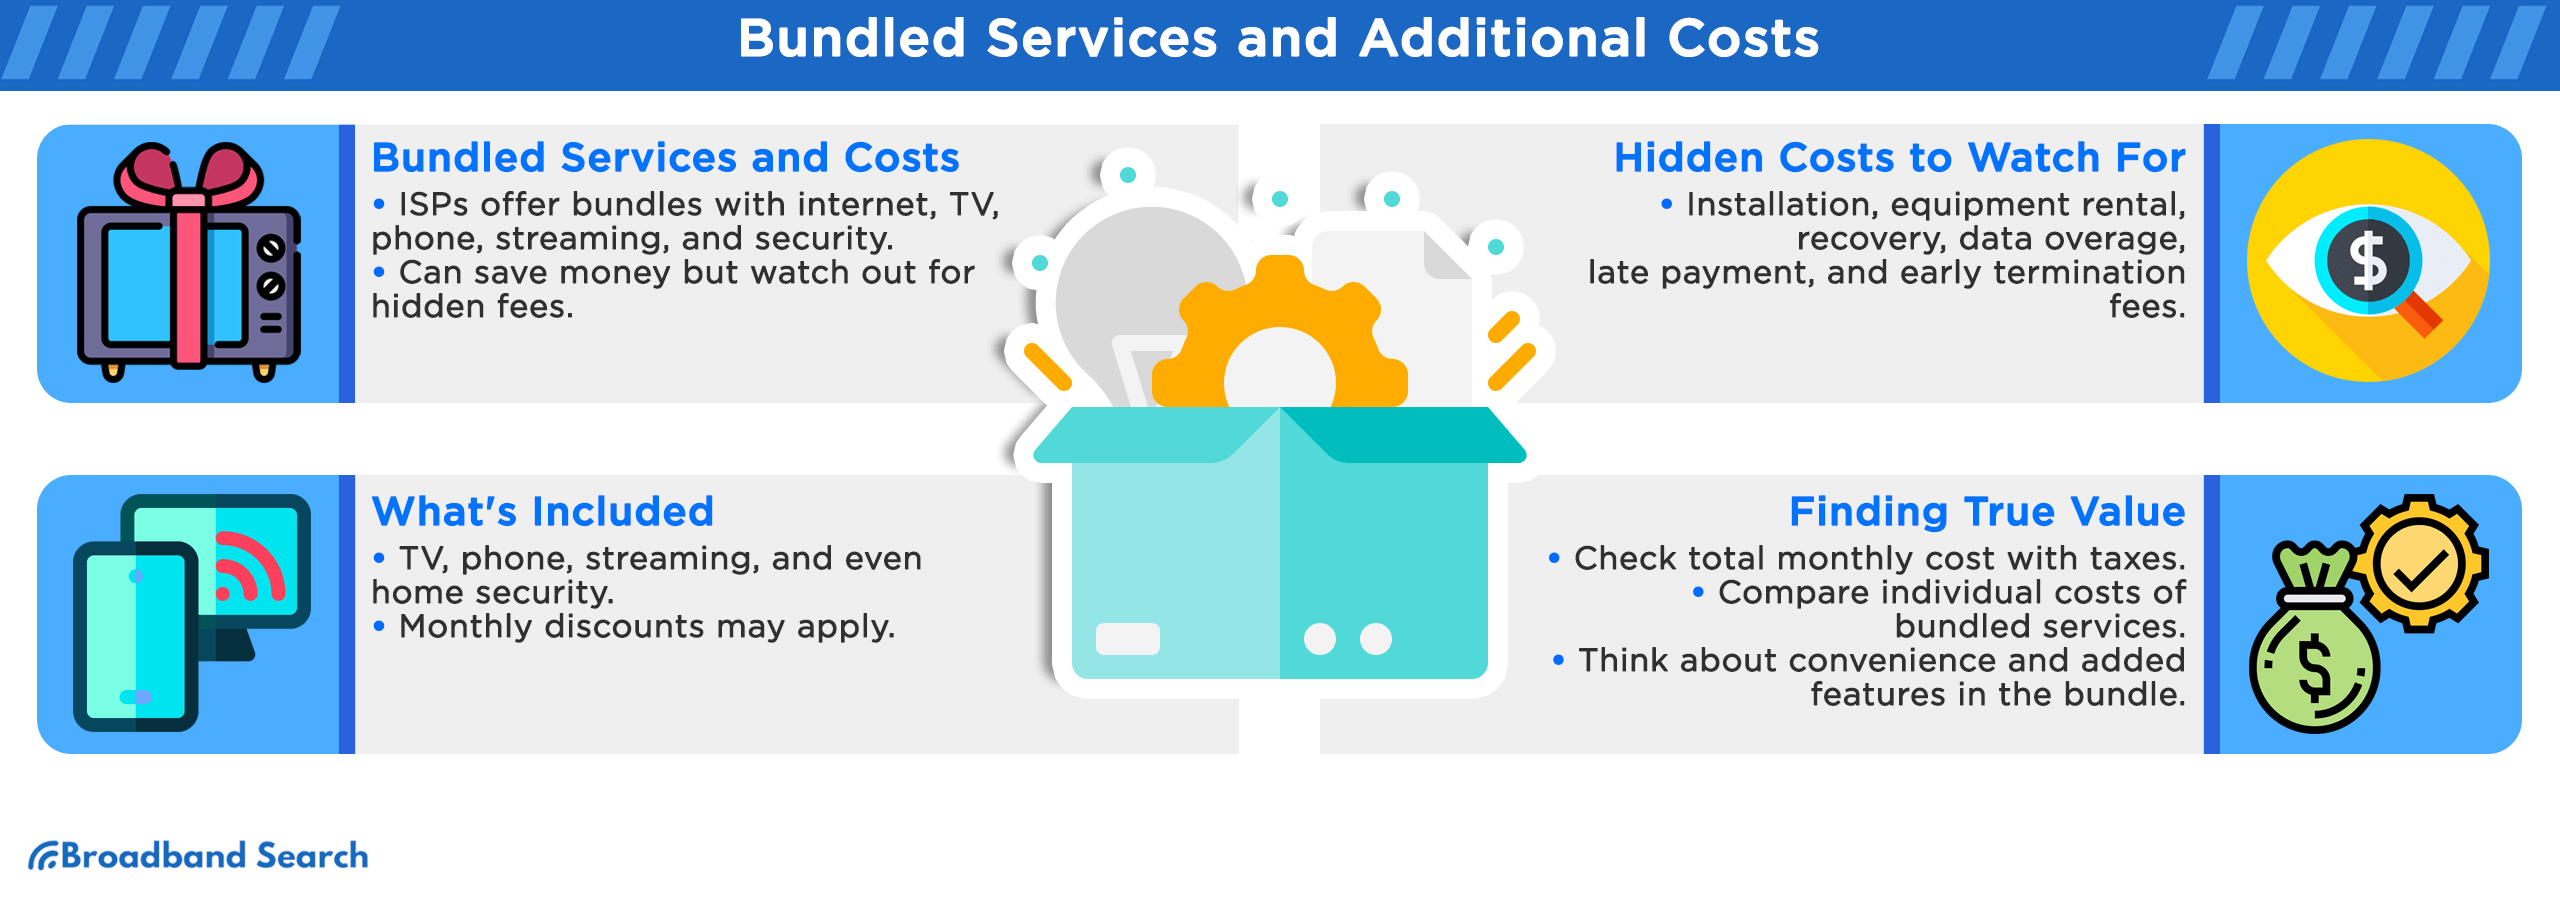 Bundled services and additional costs